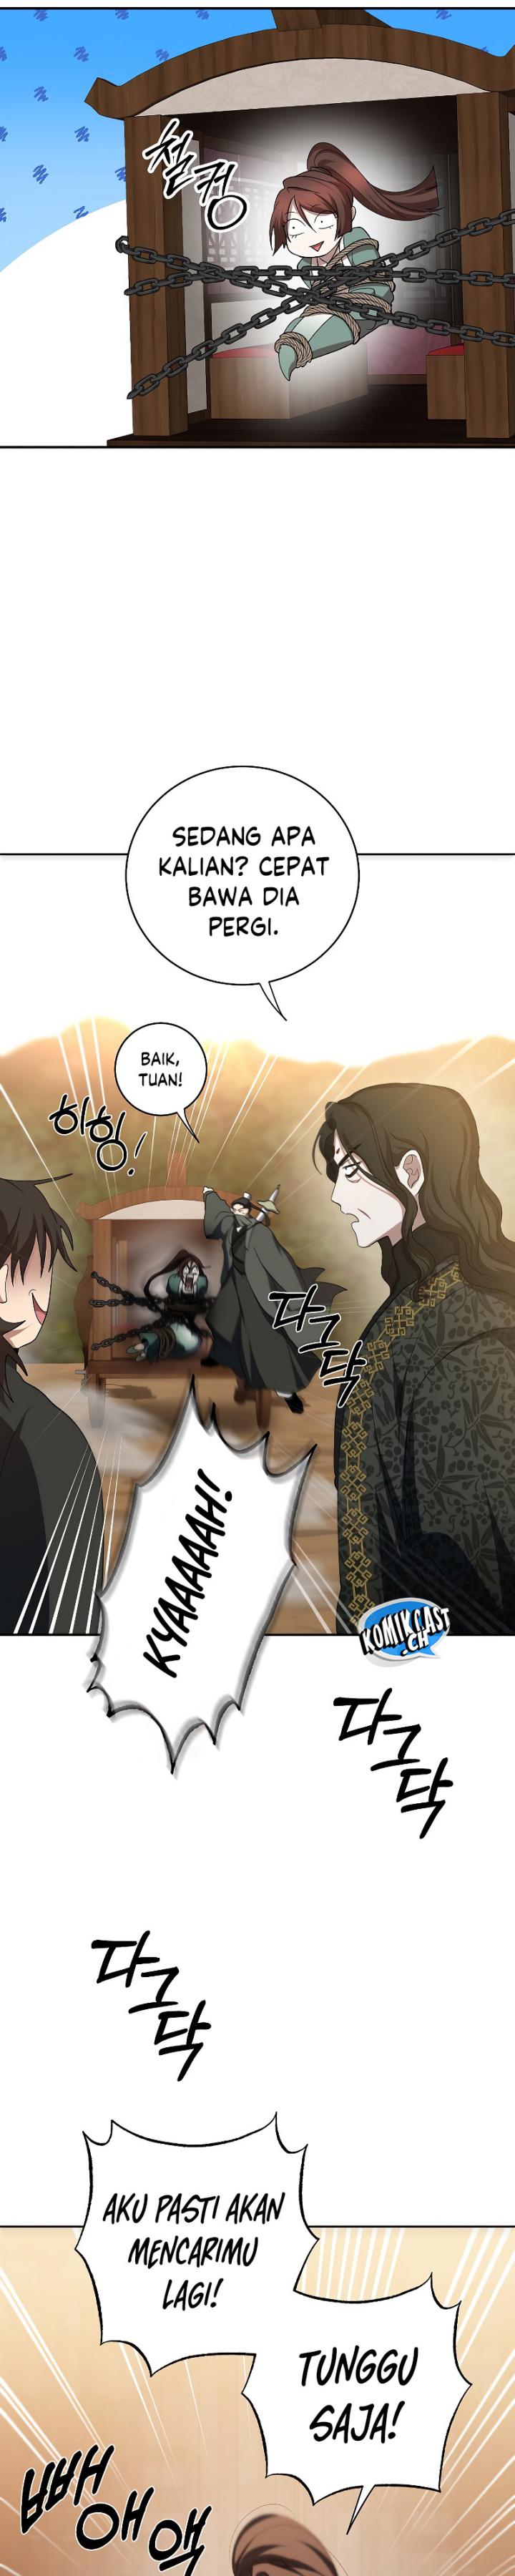 Path Of The Sword Chapter 118 S3 End - 223